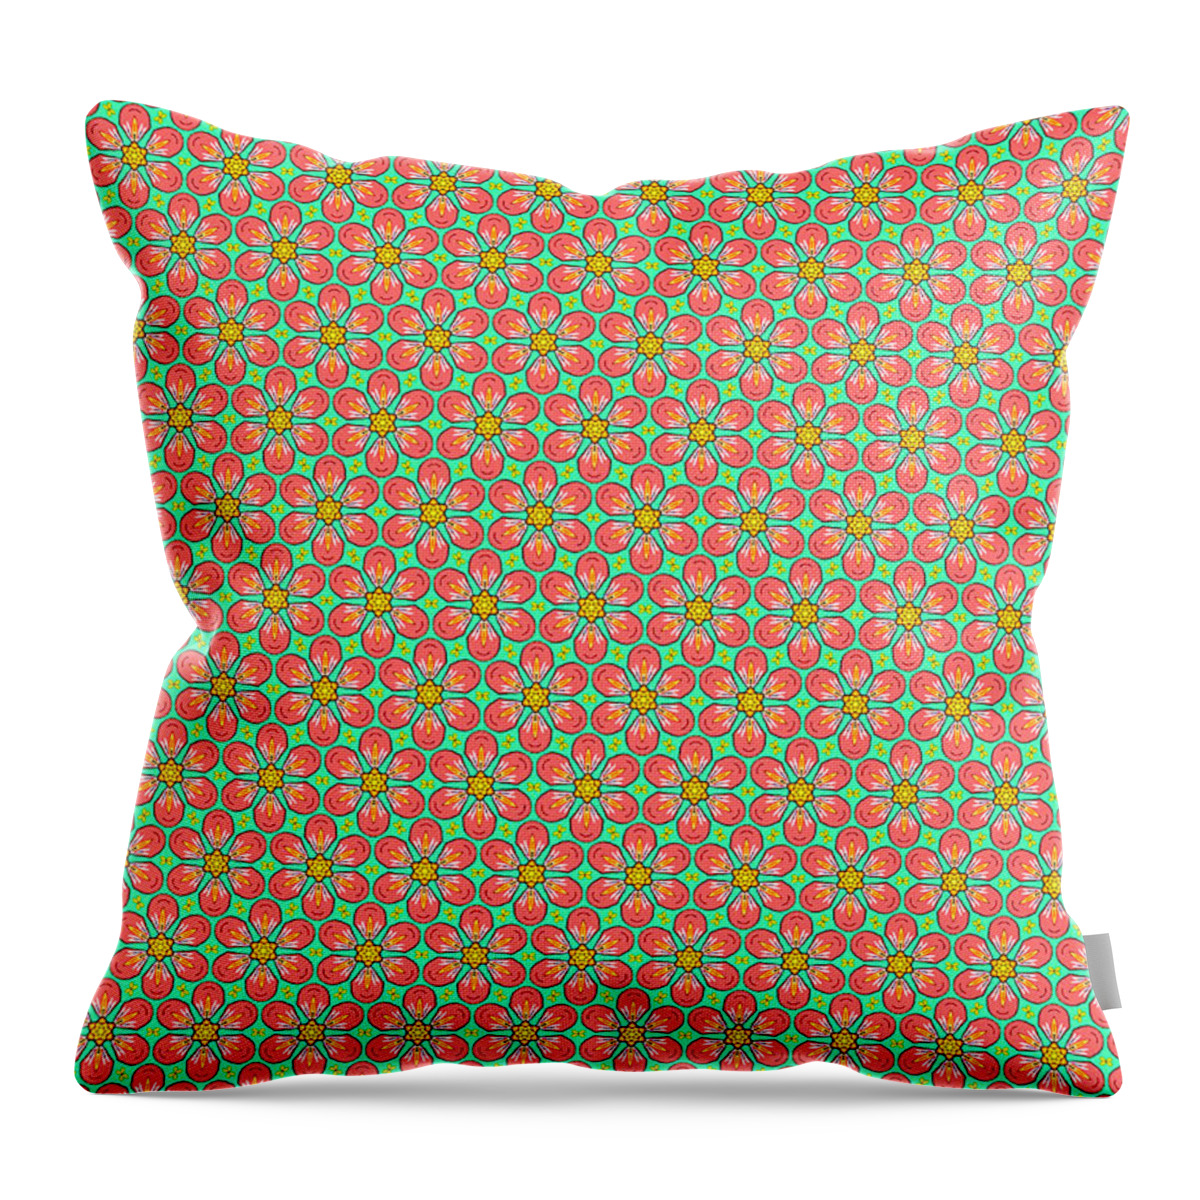 Abstract Throw Pillow featuring the digital art Grandma's Flowers by Becky Herrera